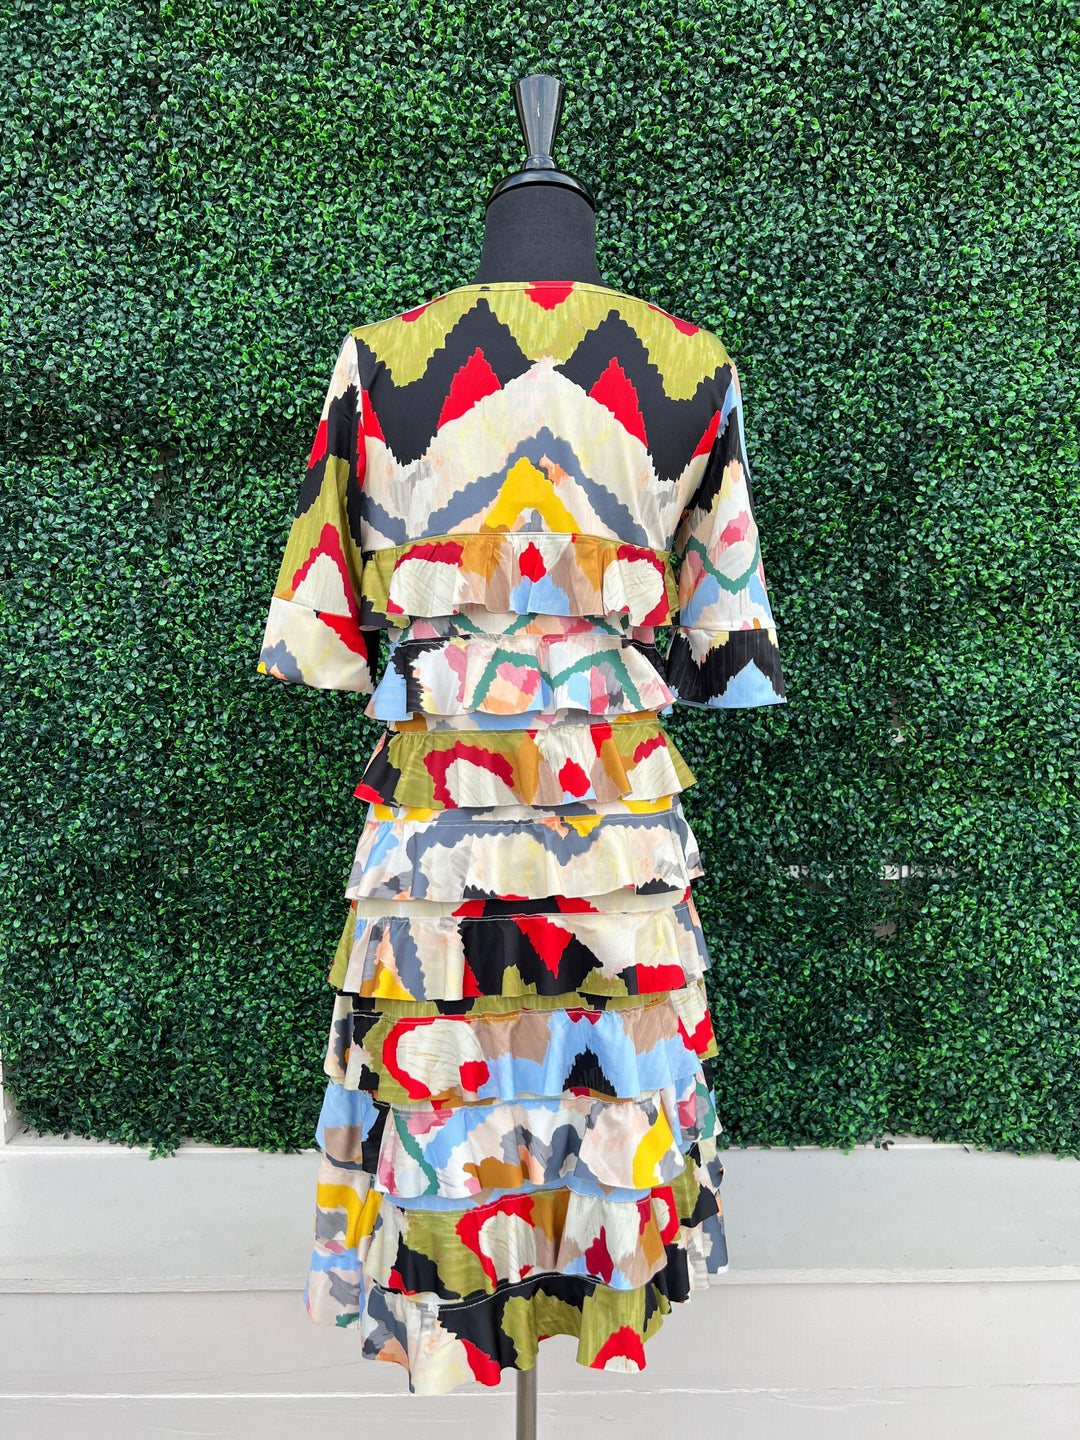 colorful abstract unique dress shop for women over 50 online houston texas